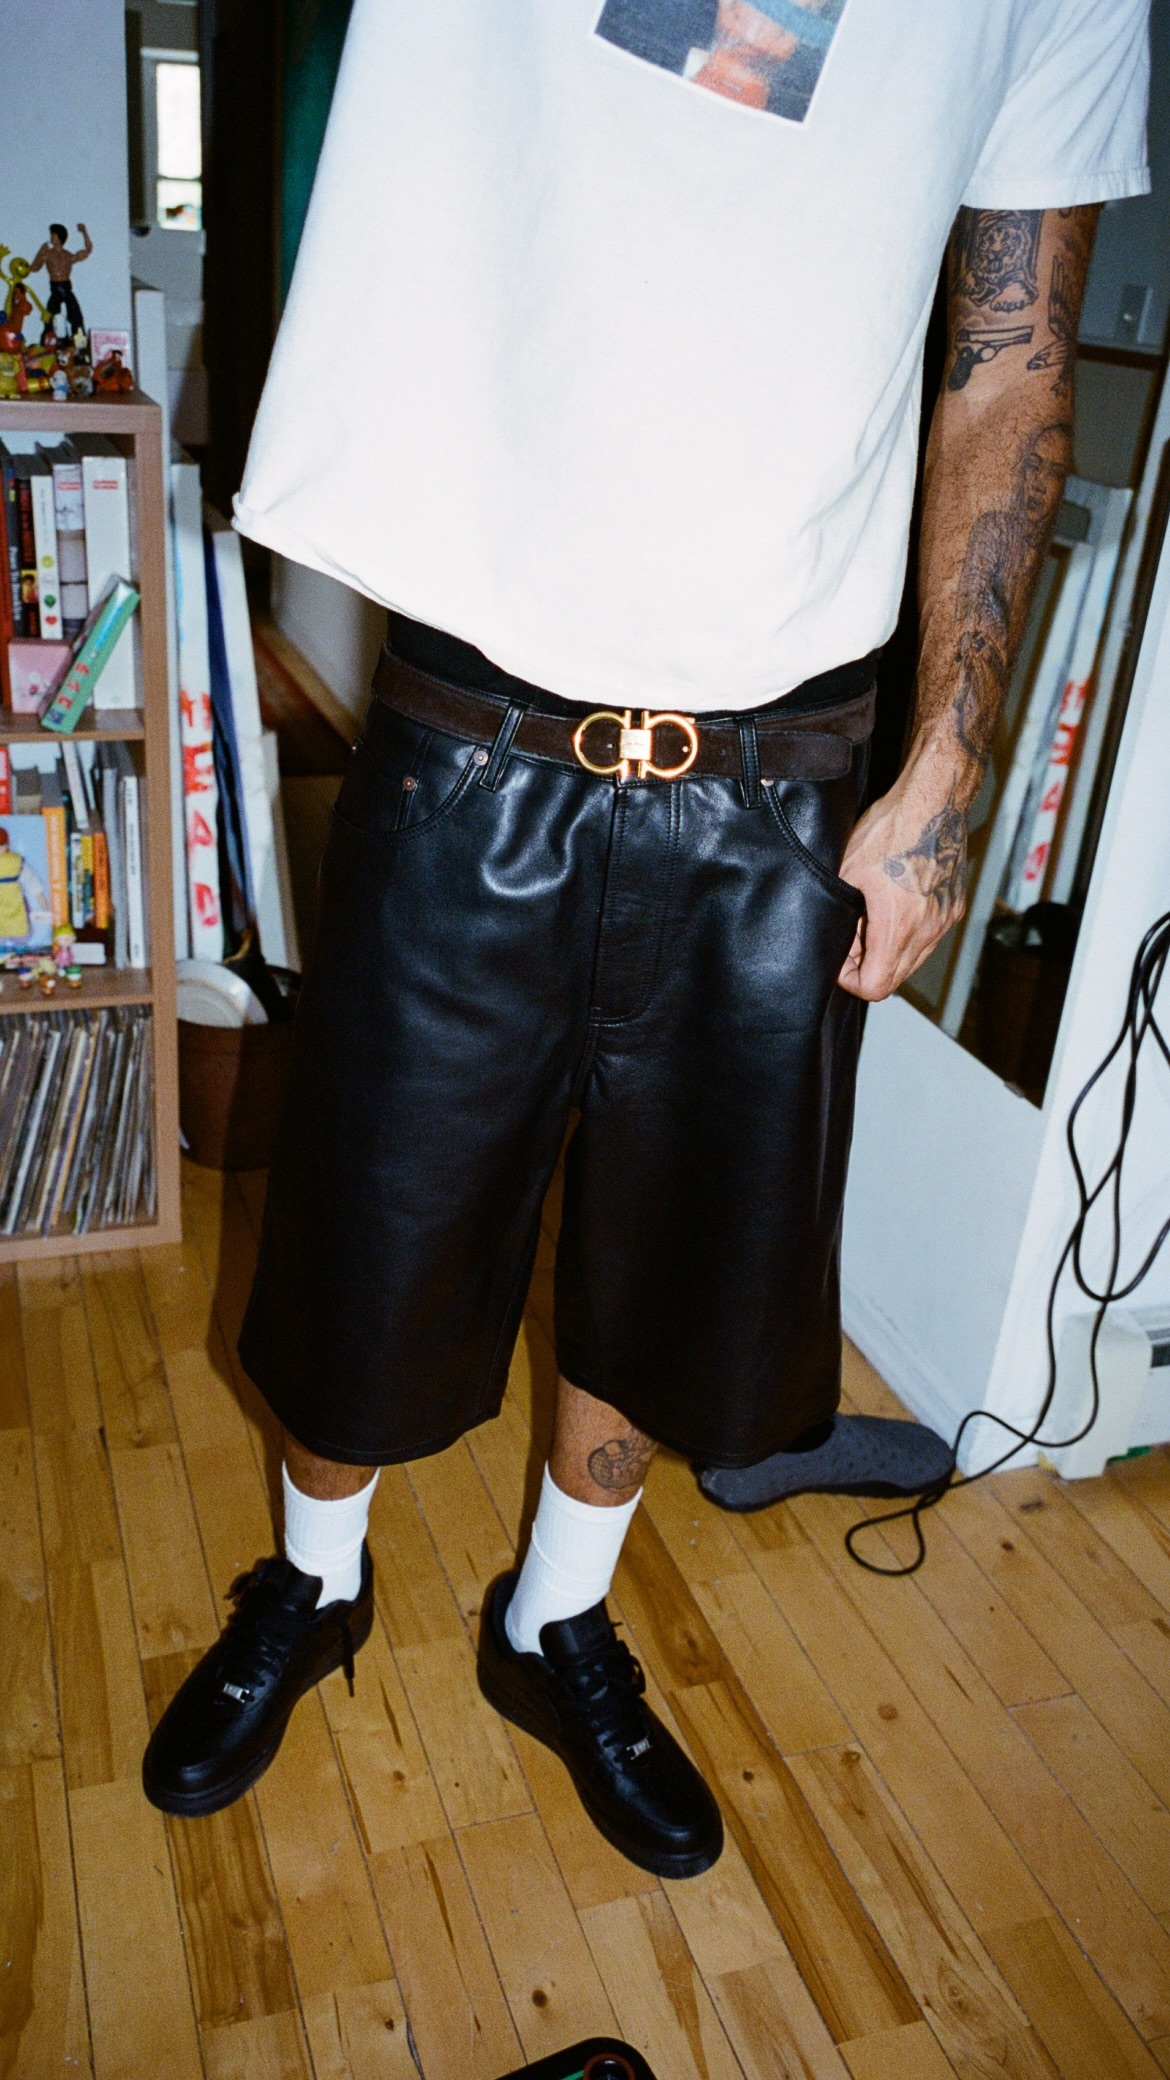 Supreme Baggy Leather Short